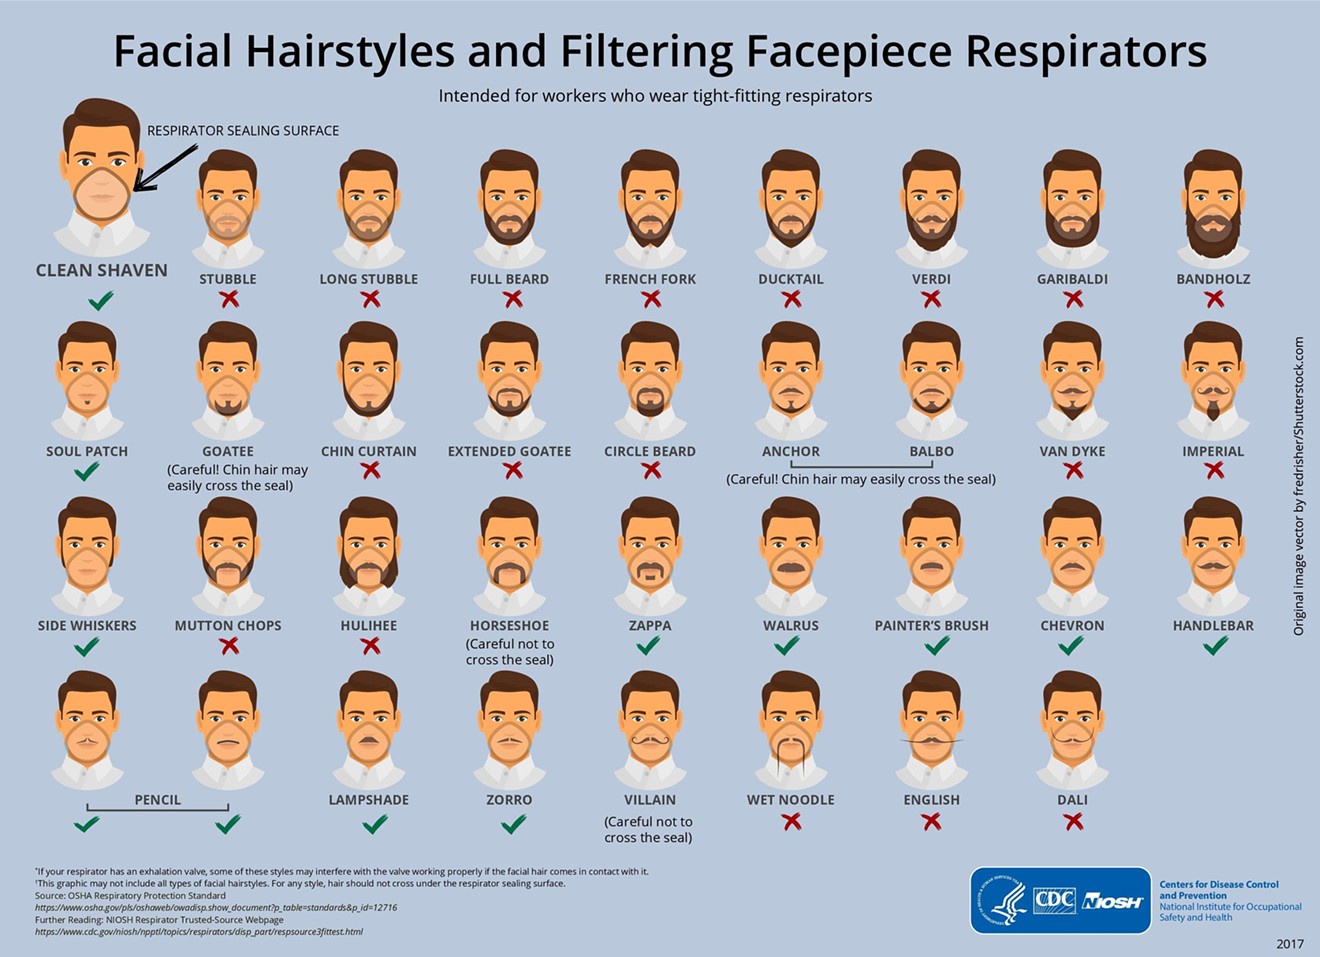 The chin curtain and French fork facial hairstyles are a no-go for paramedics who wear tight-fitting respirators, according to the National Institute for Occupational Safety and Health.